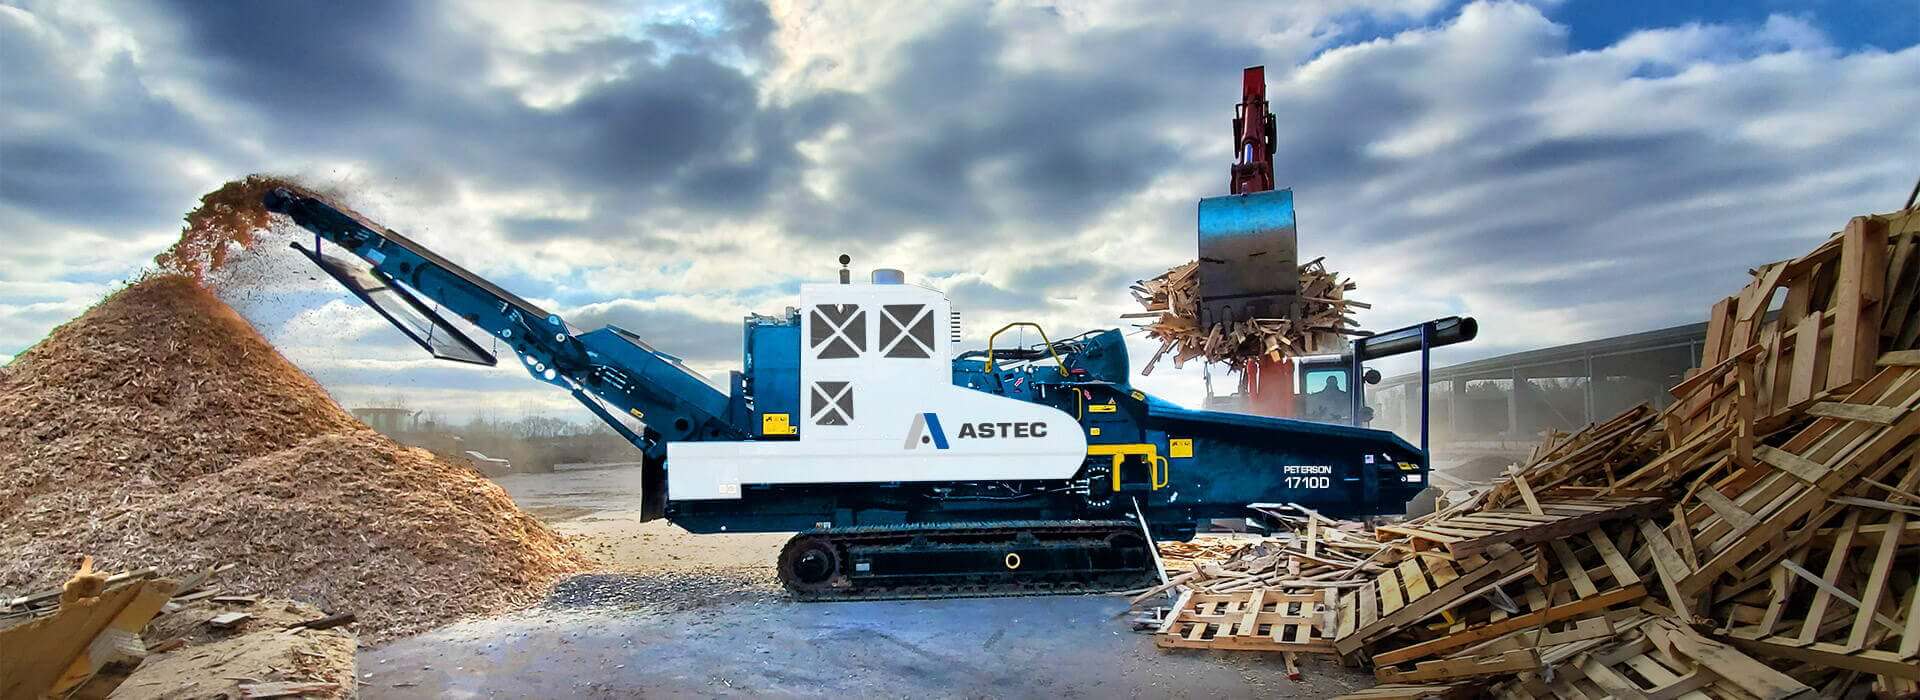 An Astec Peterson 1710D Horizontal Grinder recycling pallets into mulch and being loaded with an excavator.